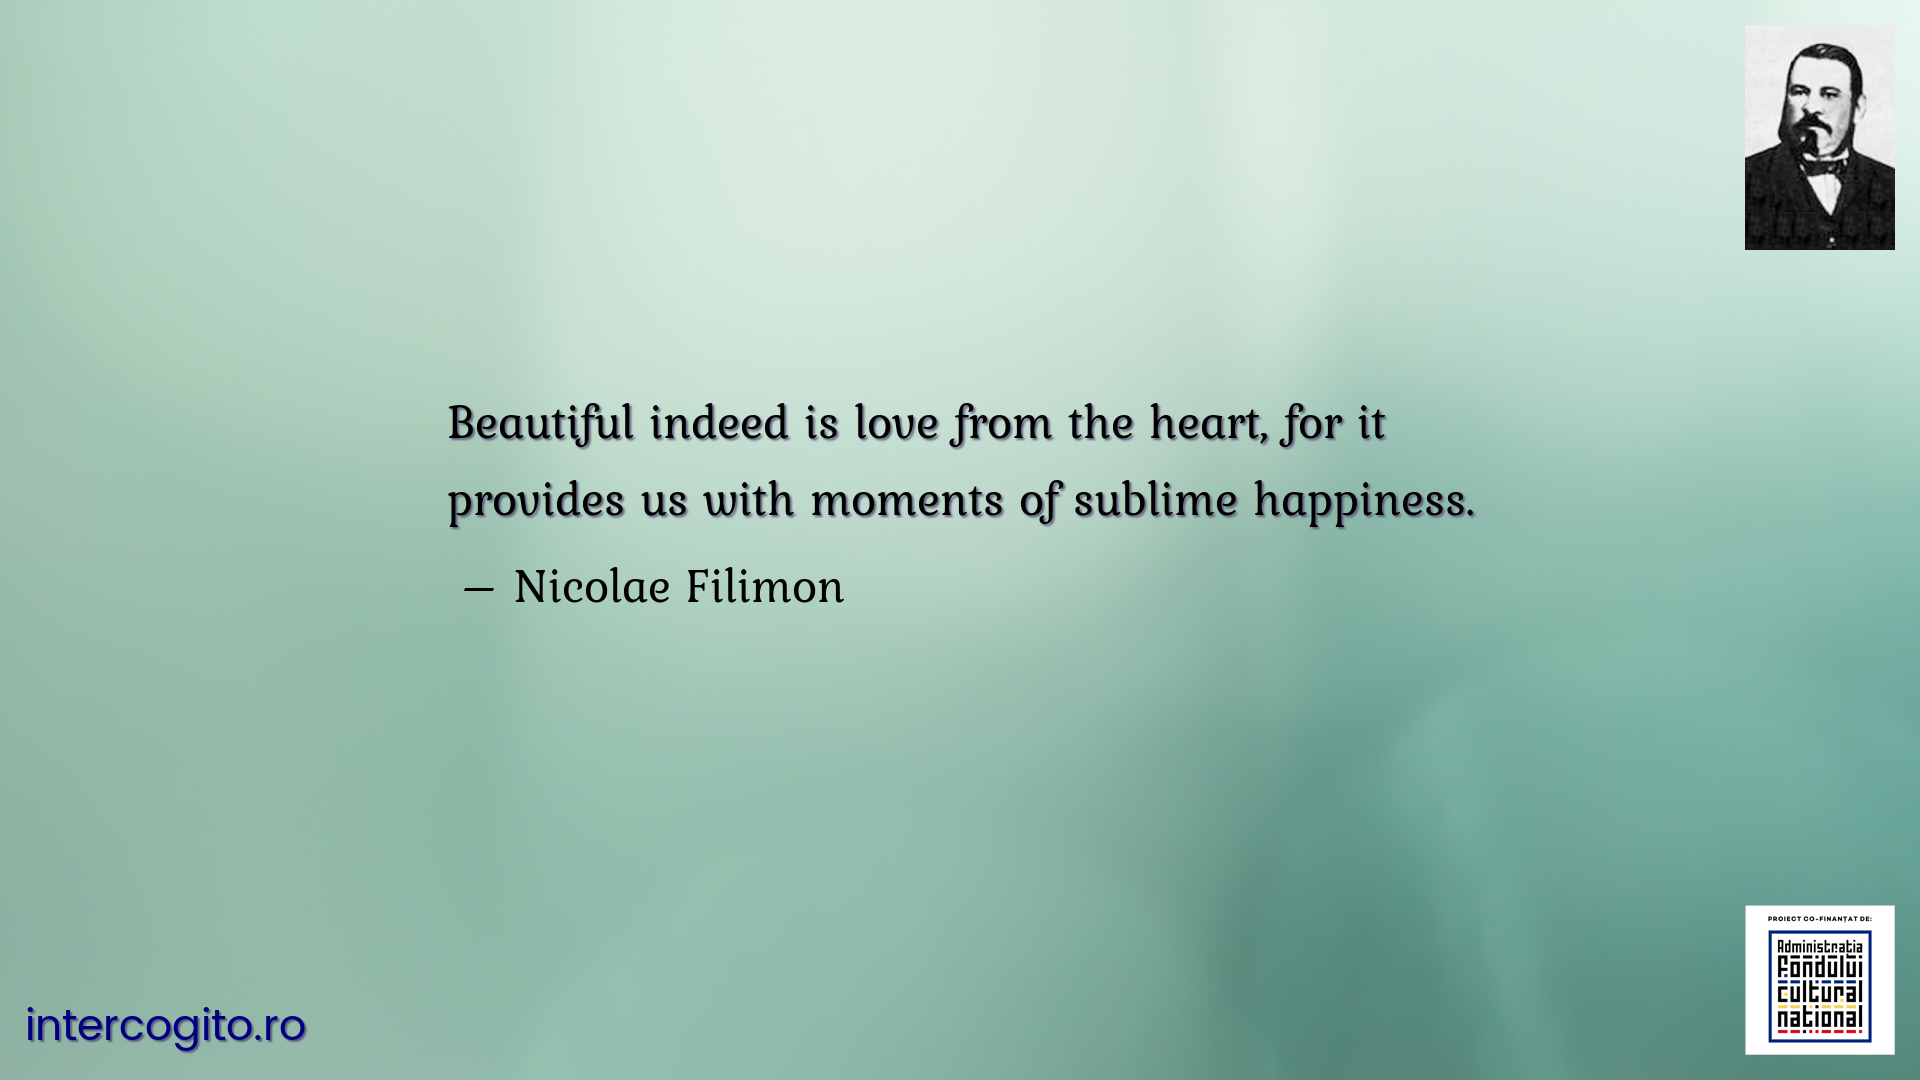 Beautiful indeed is love from the heart, for it provides us with moments of sublime happiness.